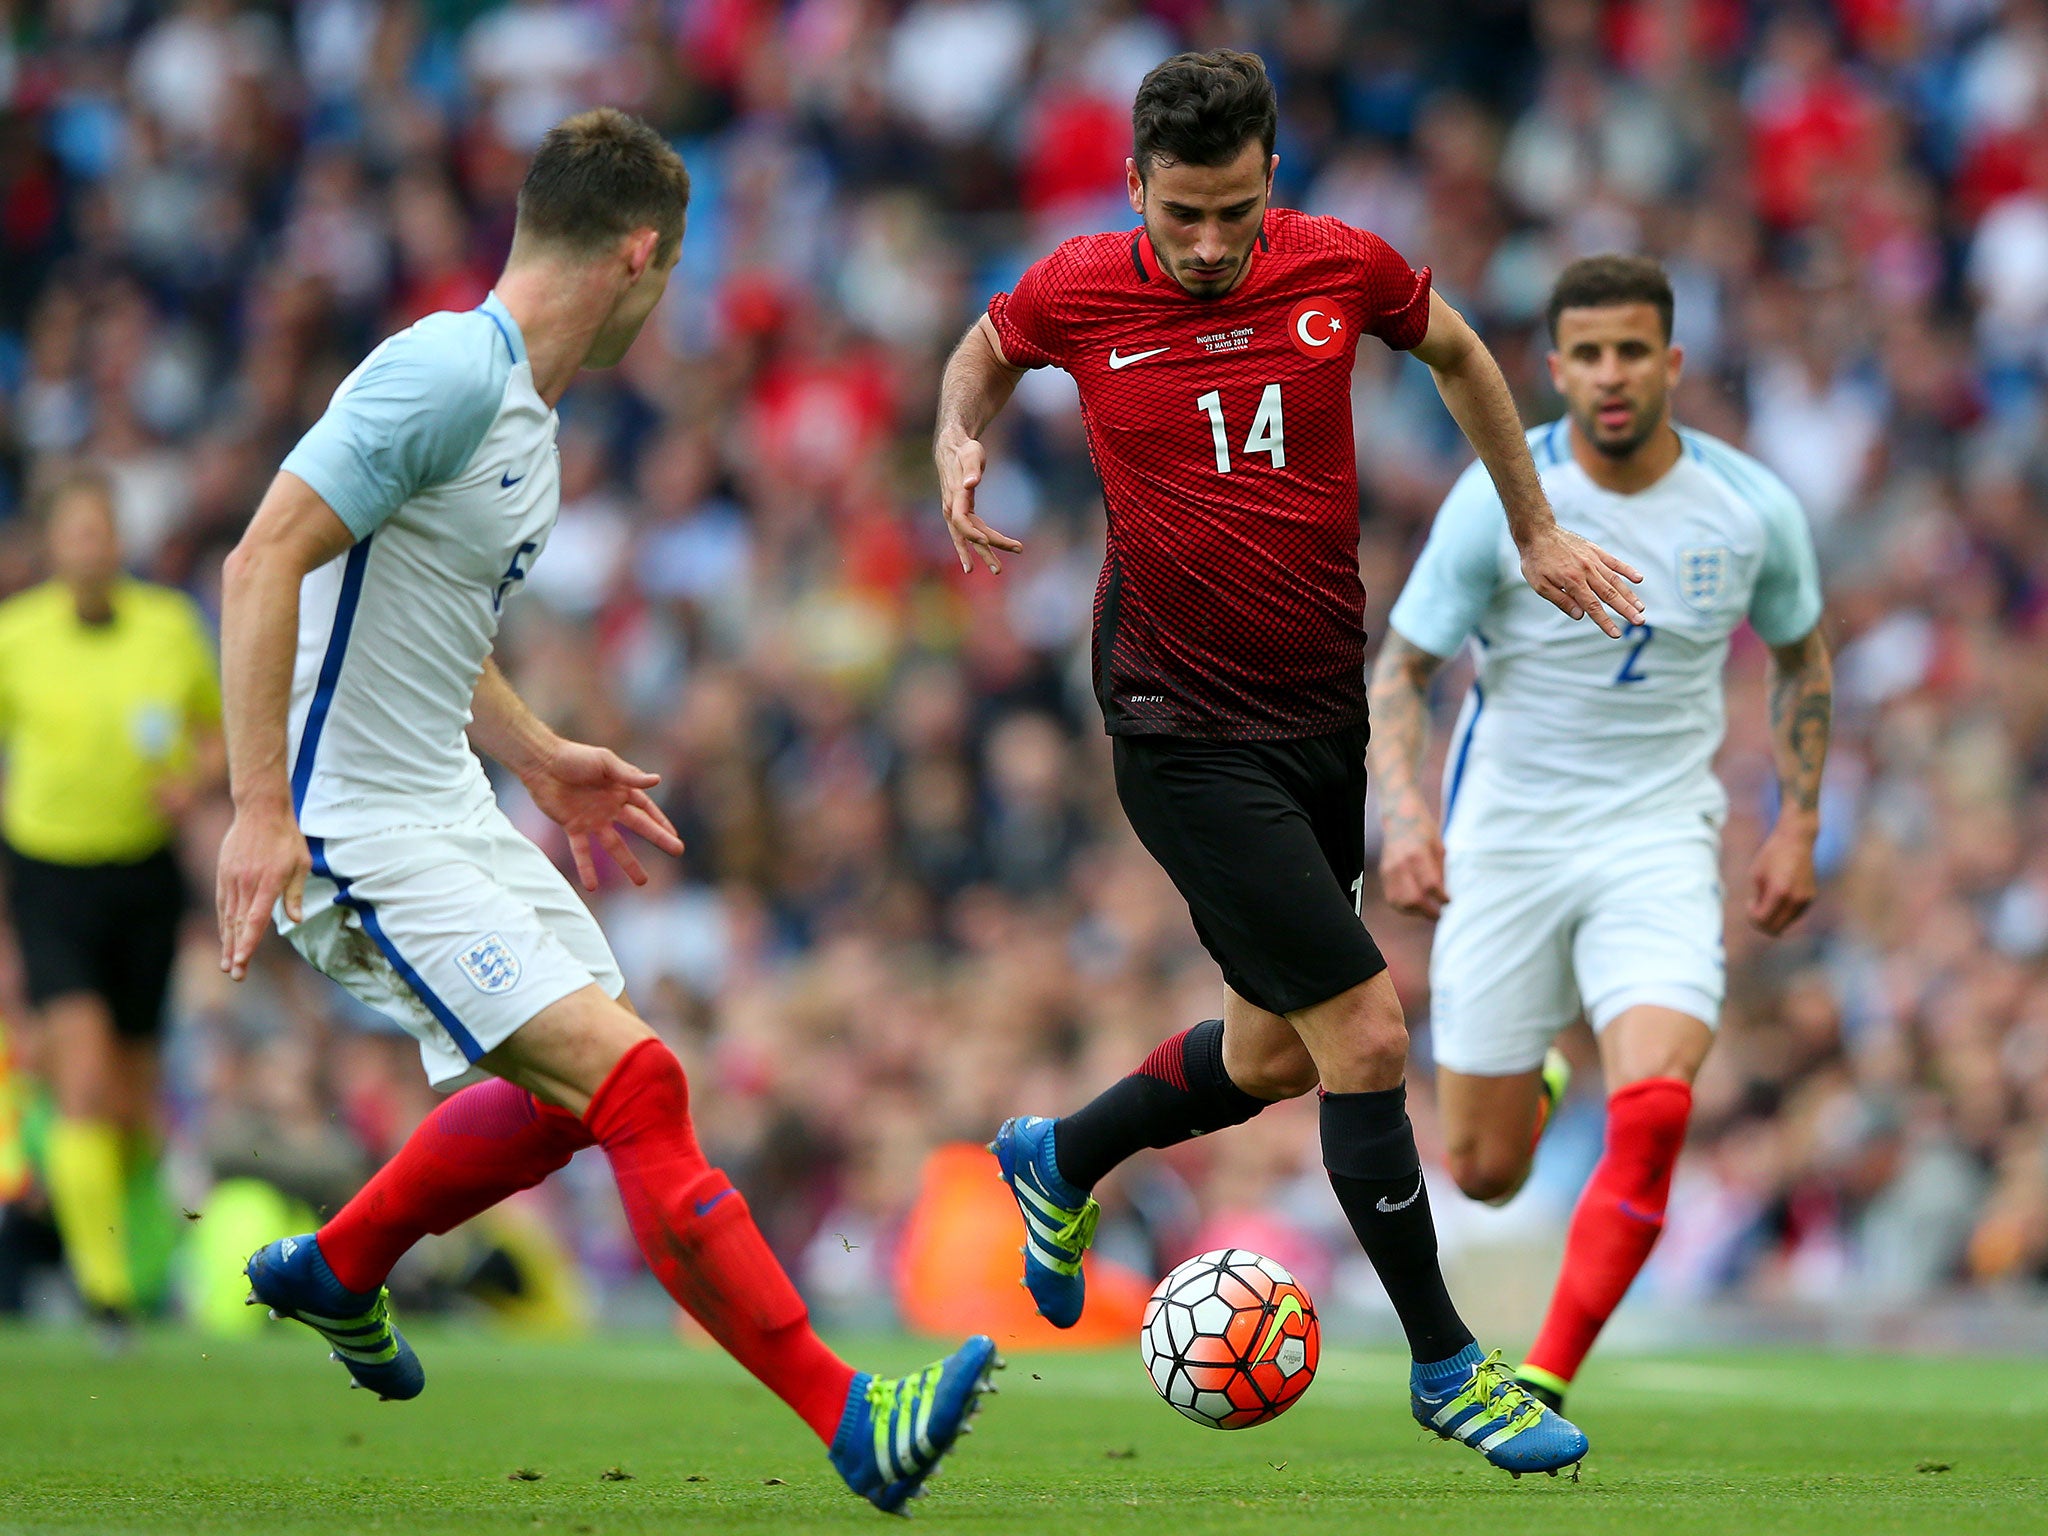 Oguzhan Ozyakup in action against England at the Etihad Stadium last month